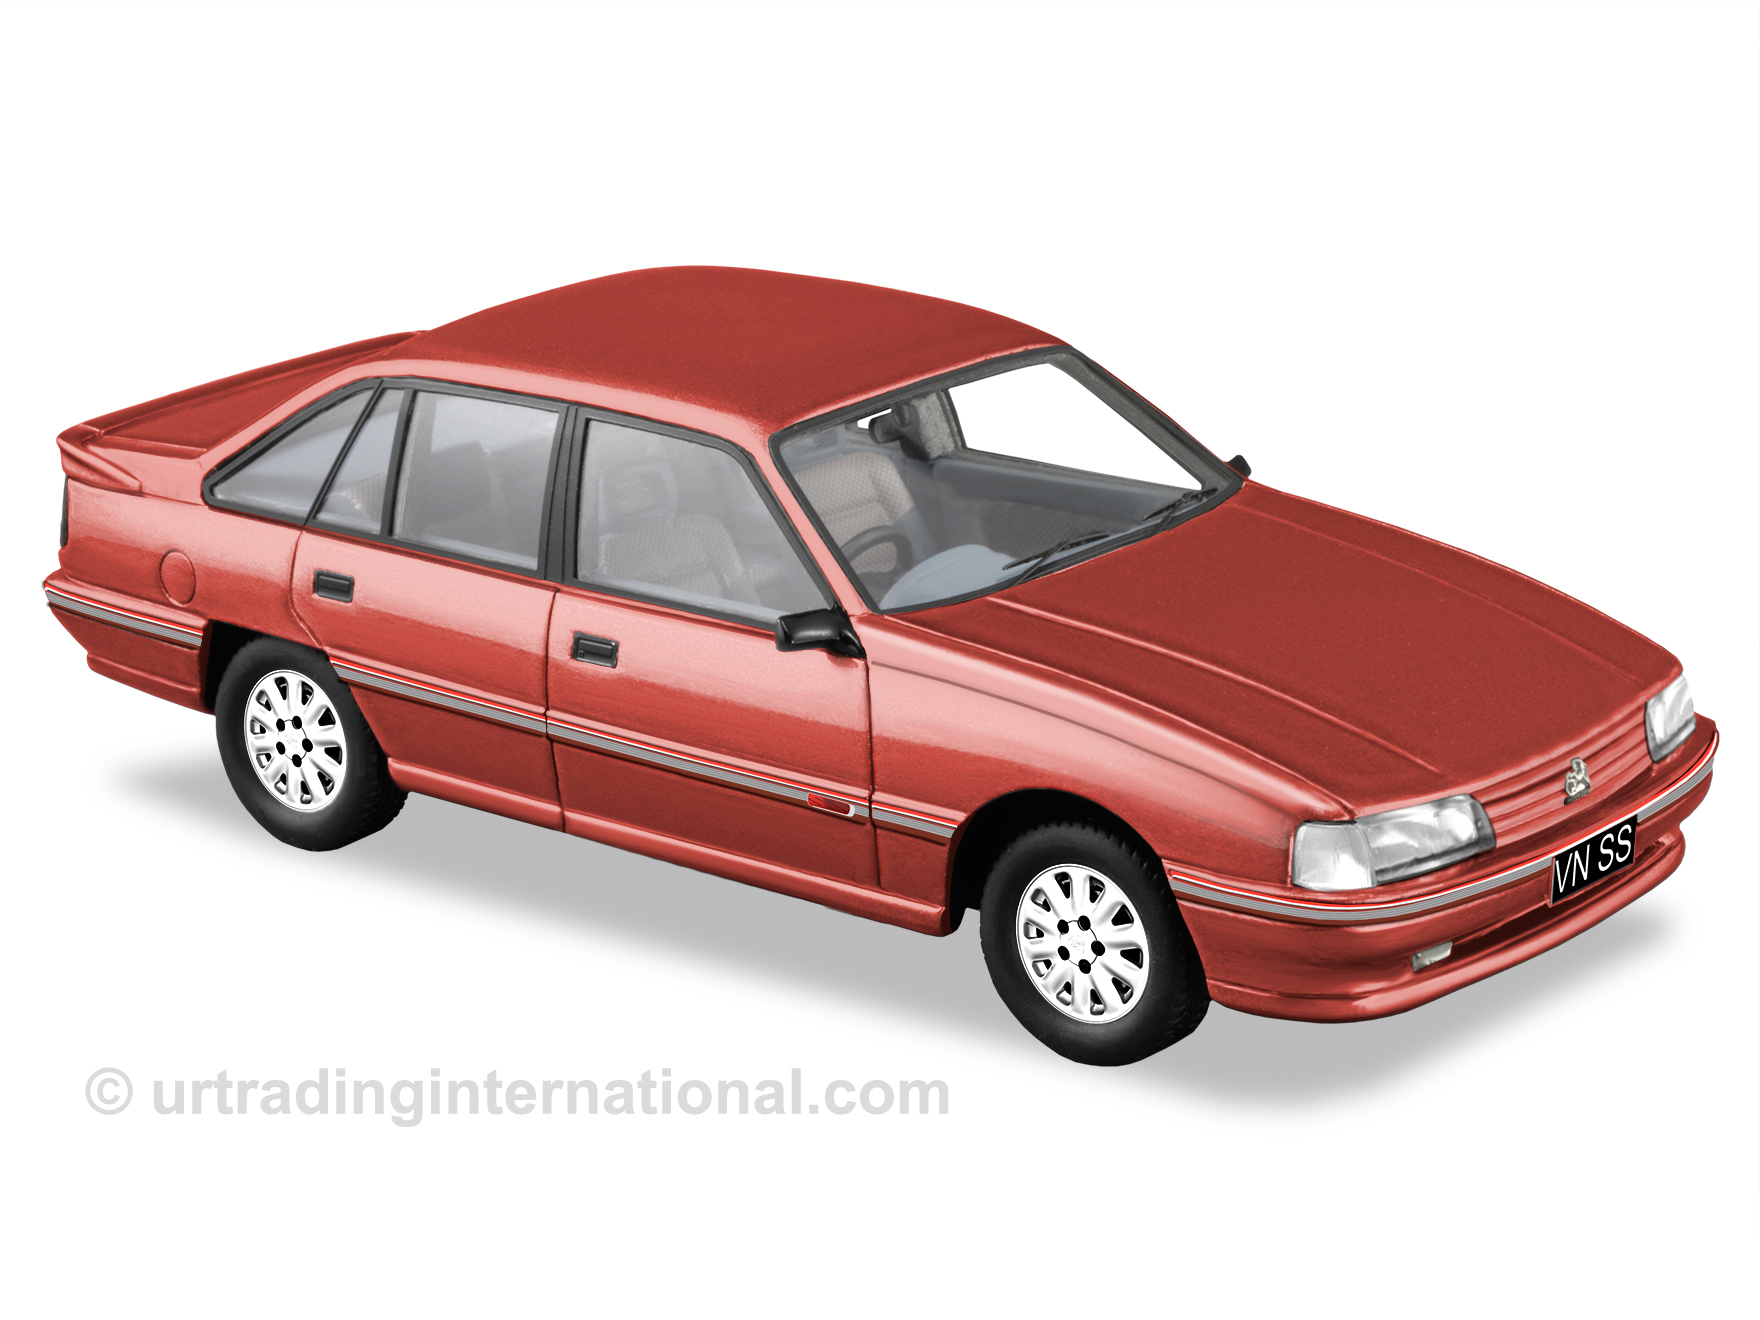 1988-91 VN SS Commodore – Phoenix Red